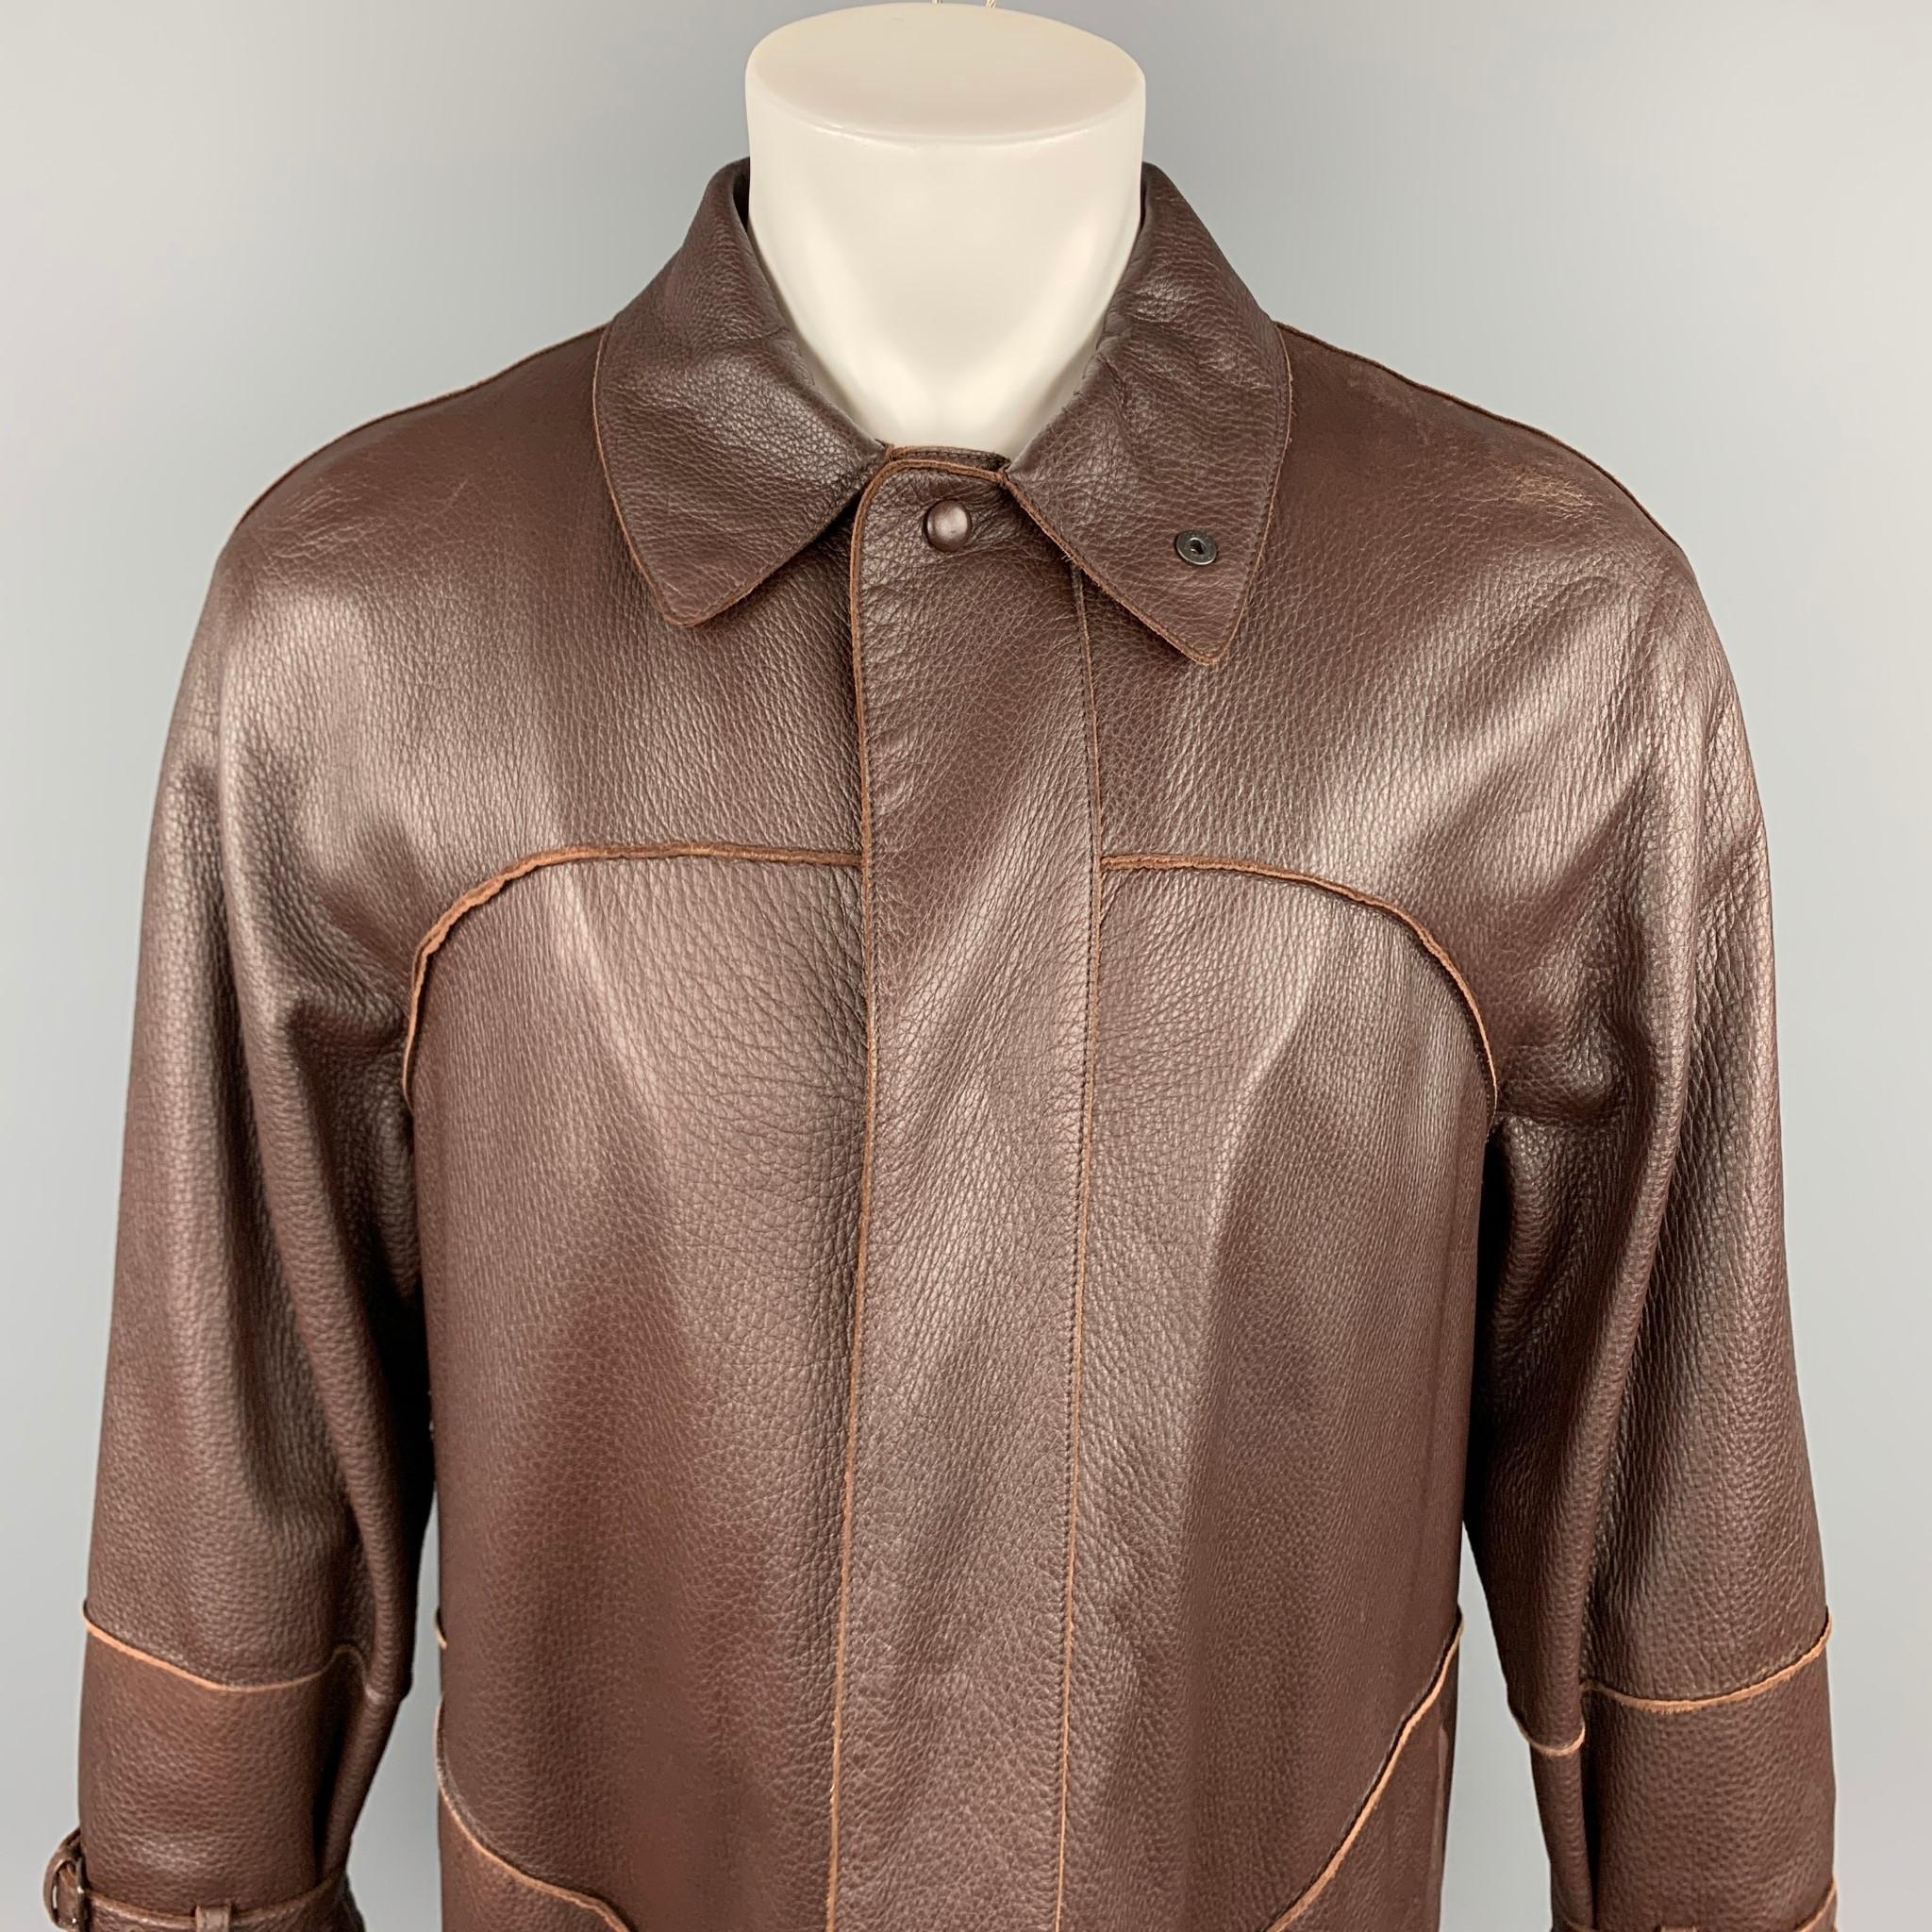 BOTTEGA VENETA coat comes in a brown leather with a full liner featuring oversized fit, belted cuffs, slit pockets, and a hidden button closure. Made in Italy.

Very Good Pre-Owned Condition.
Marked: IT 48

Measurements:

Shoulder: 19 in.
Chest: 44